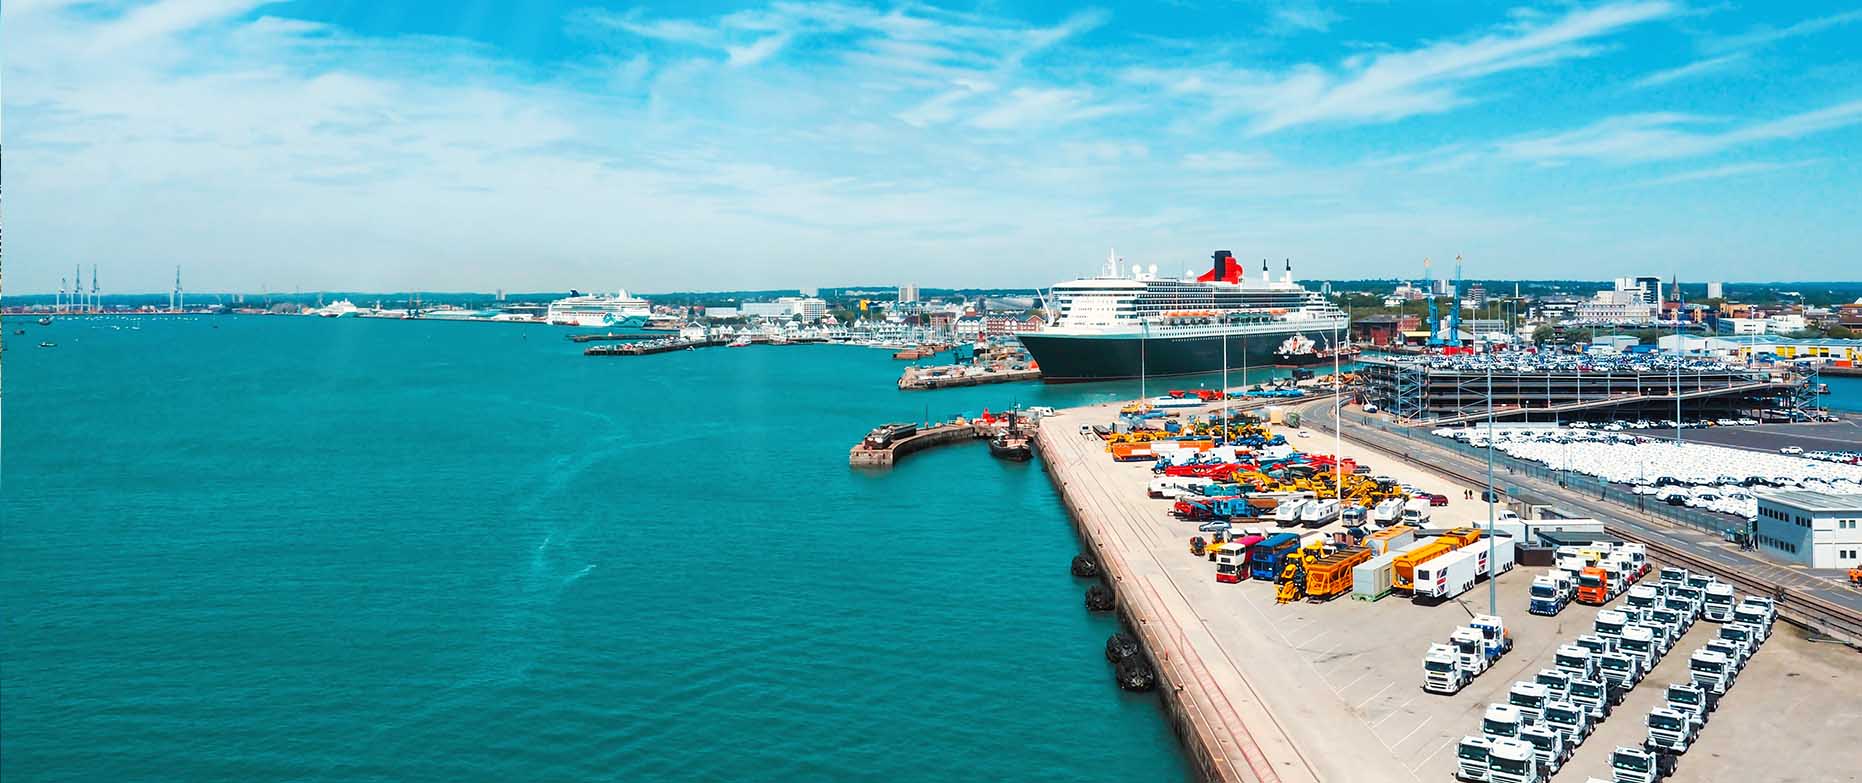 Cruise Deals From Southampton The Cruise Line